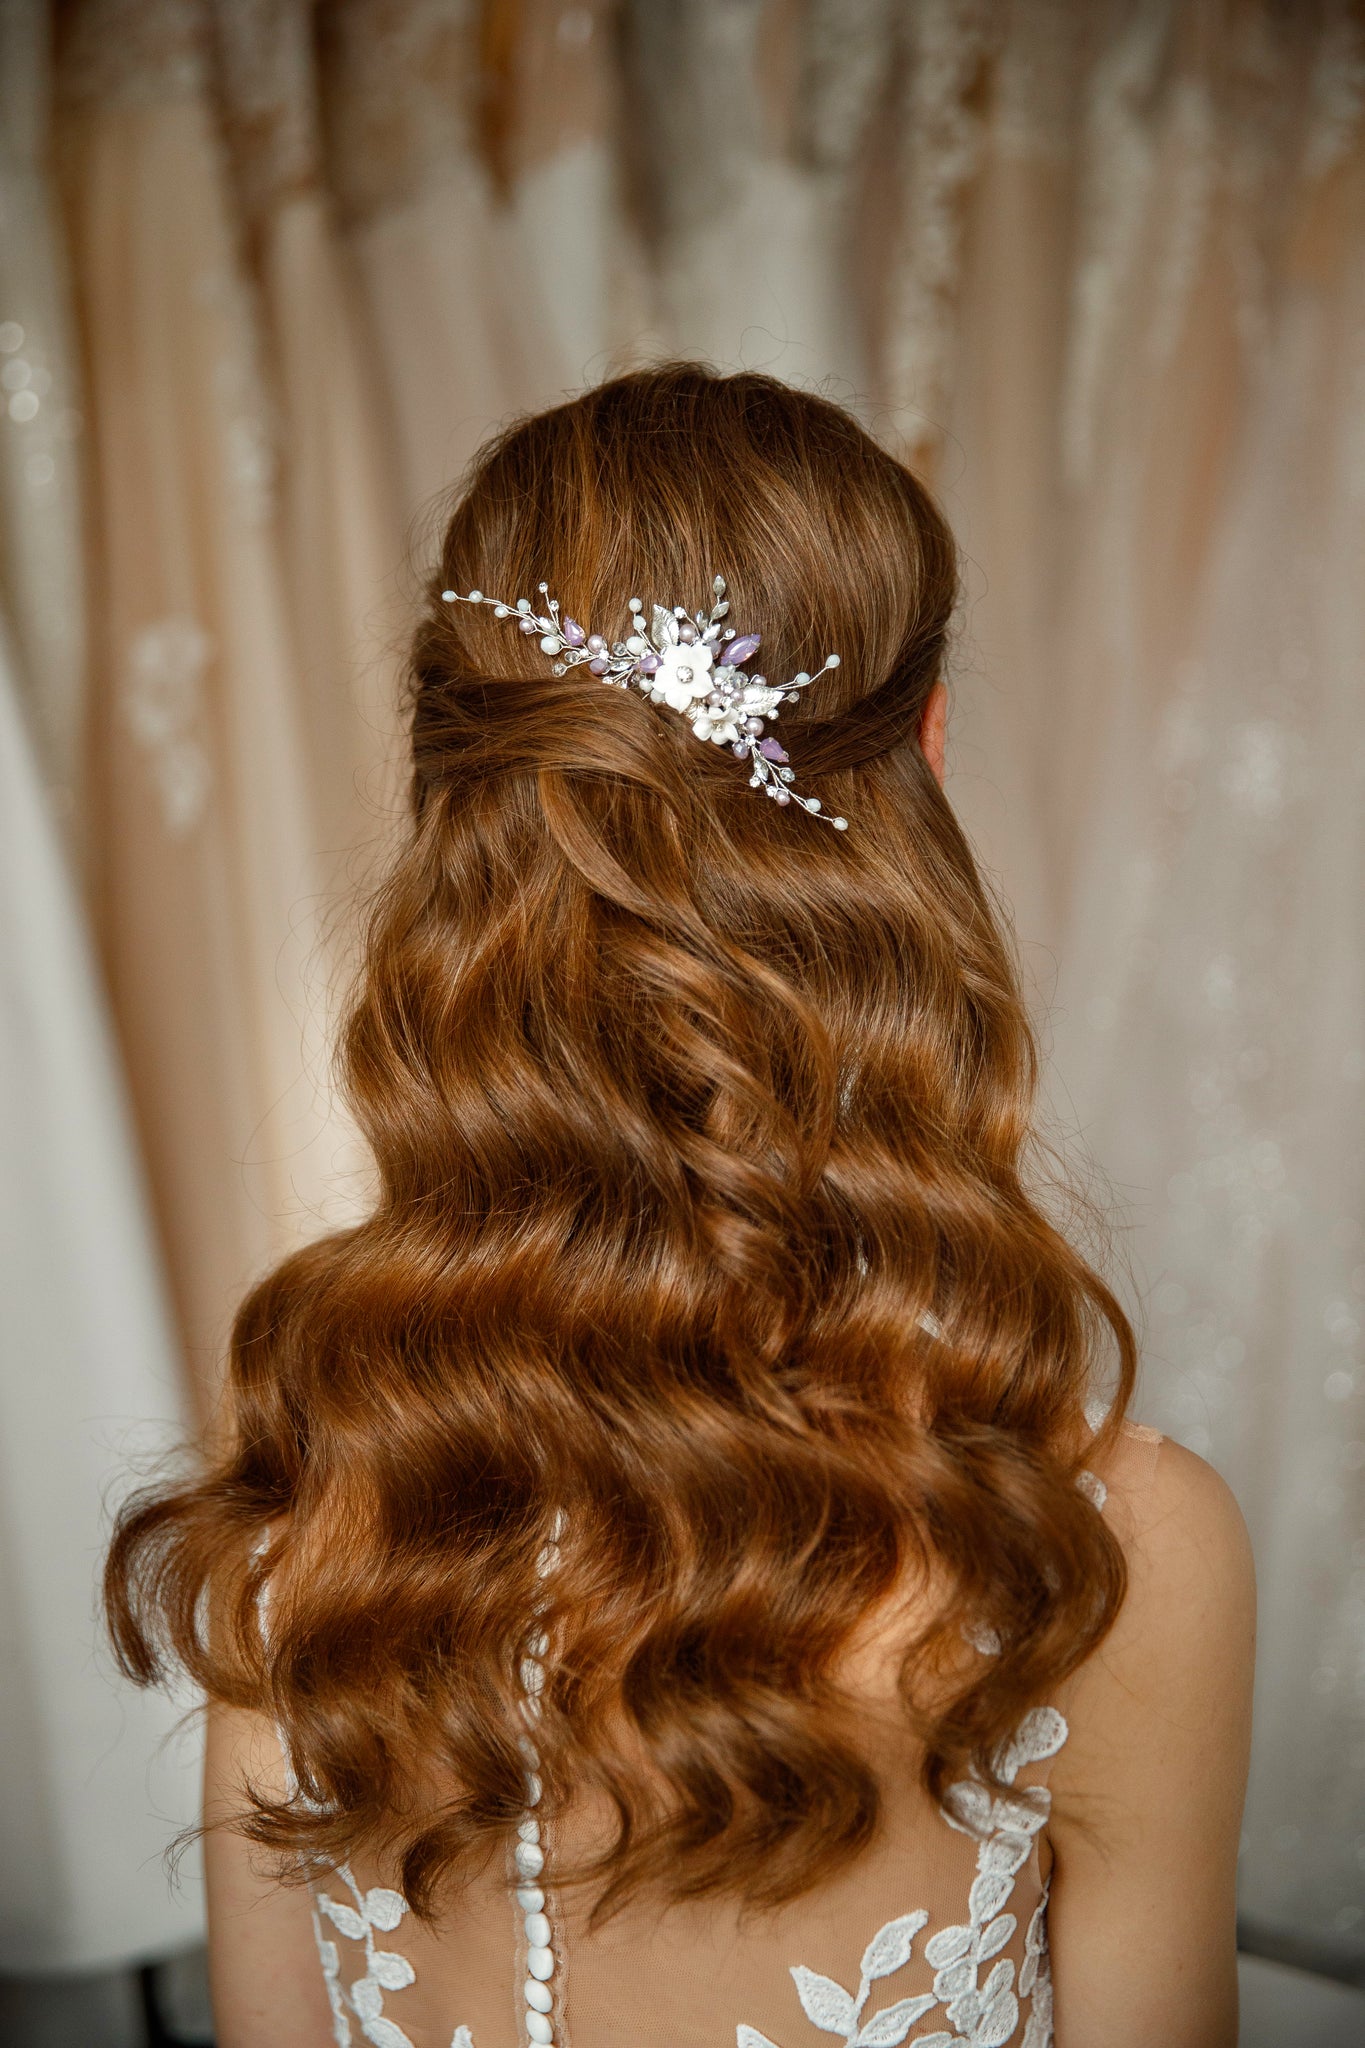 Crystal wedding hair comb for bridal hairstyle